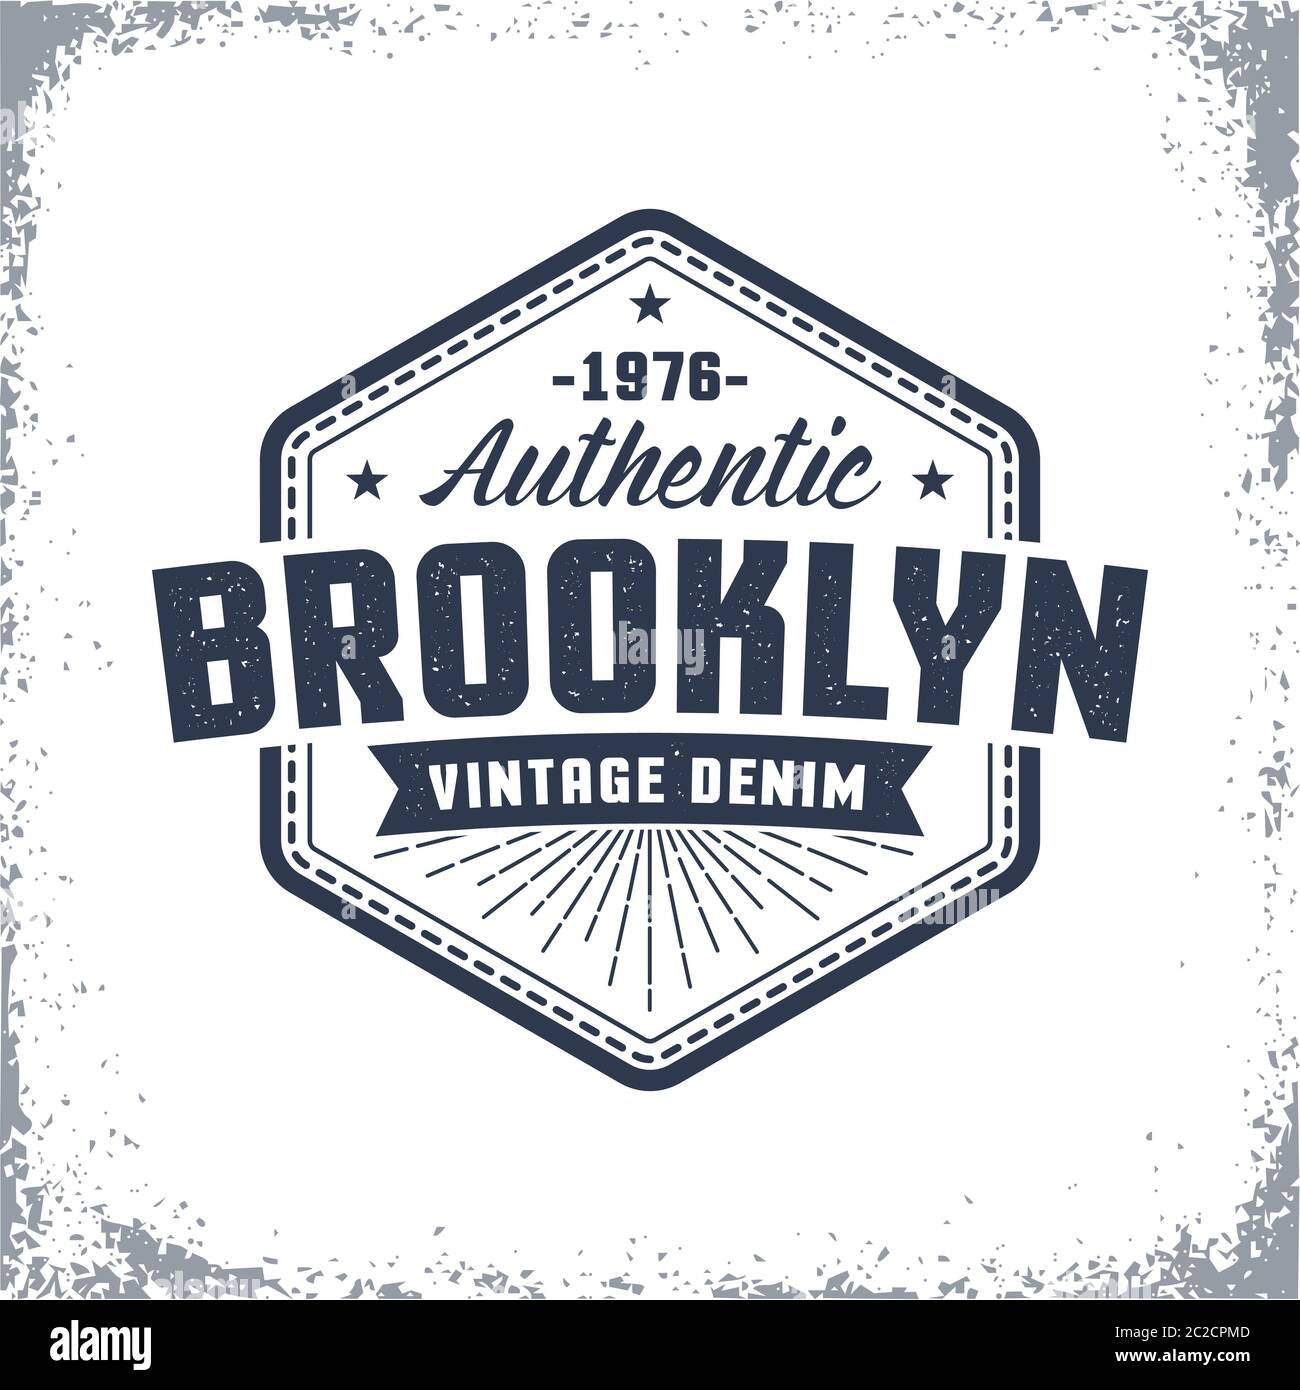 Brooklyn vintage logo with grunge effect Stock Vector